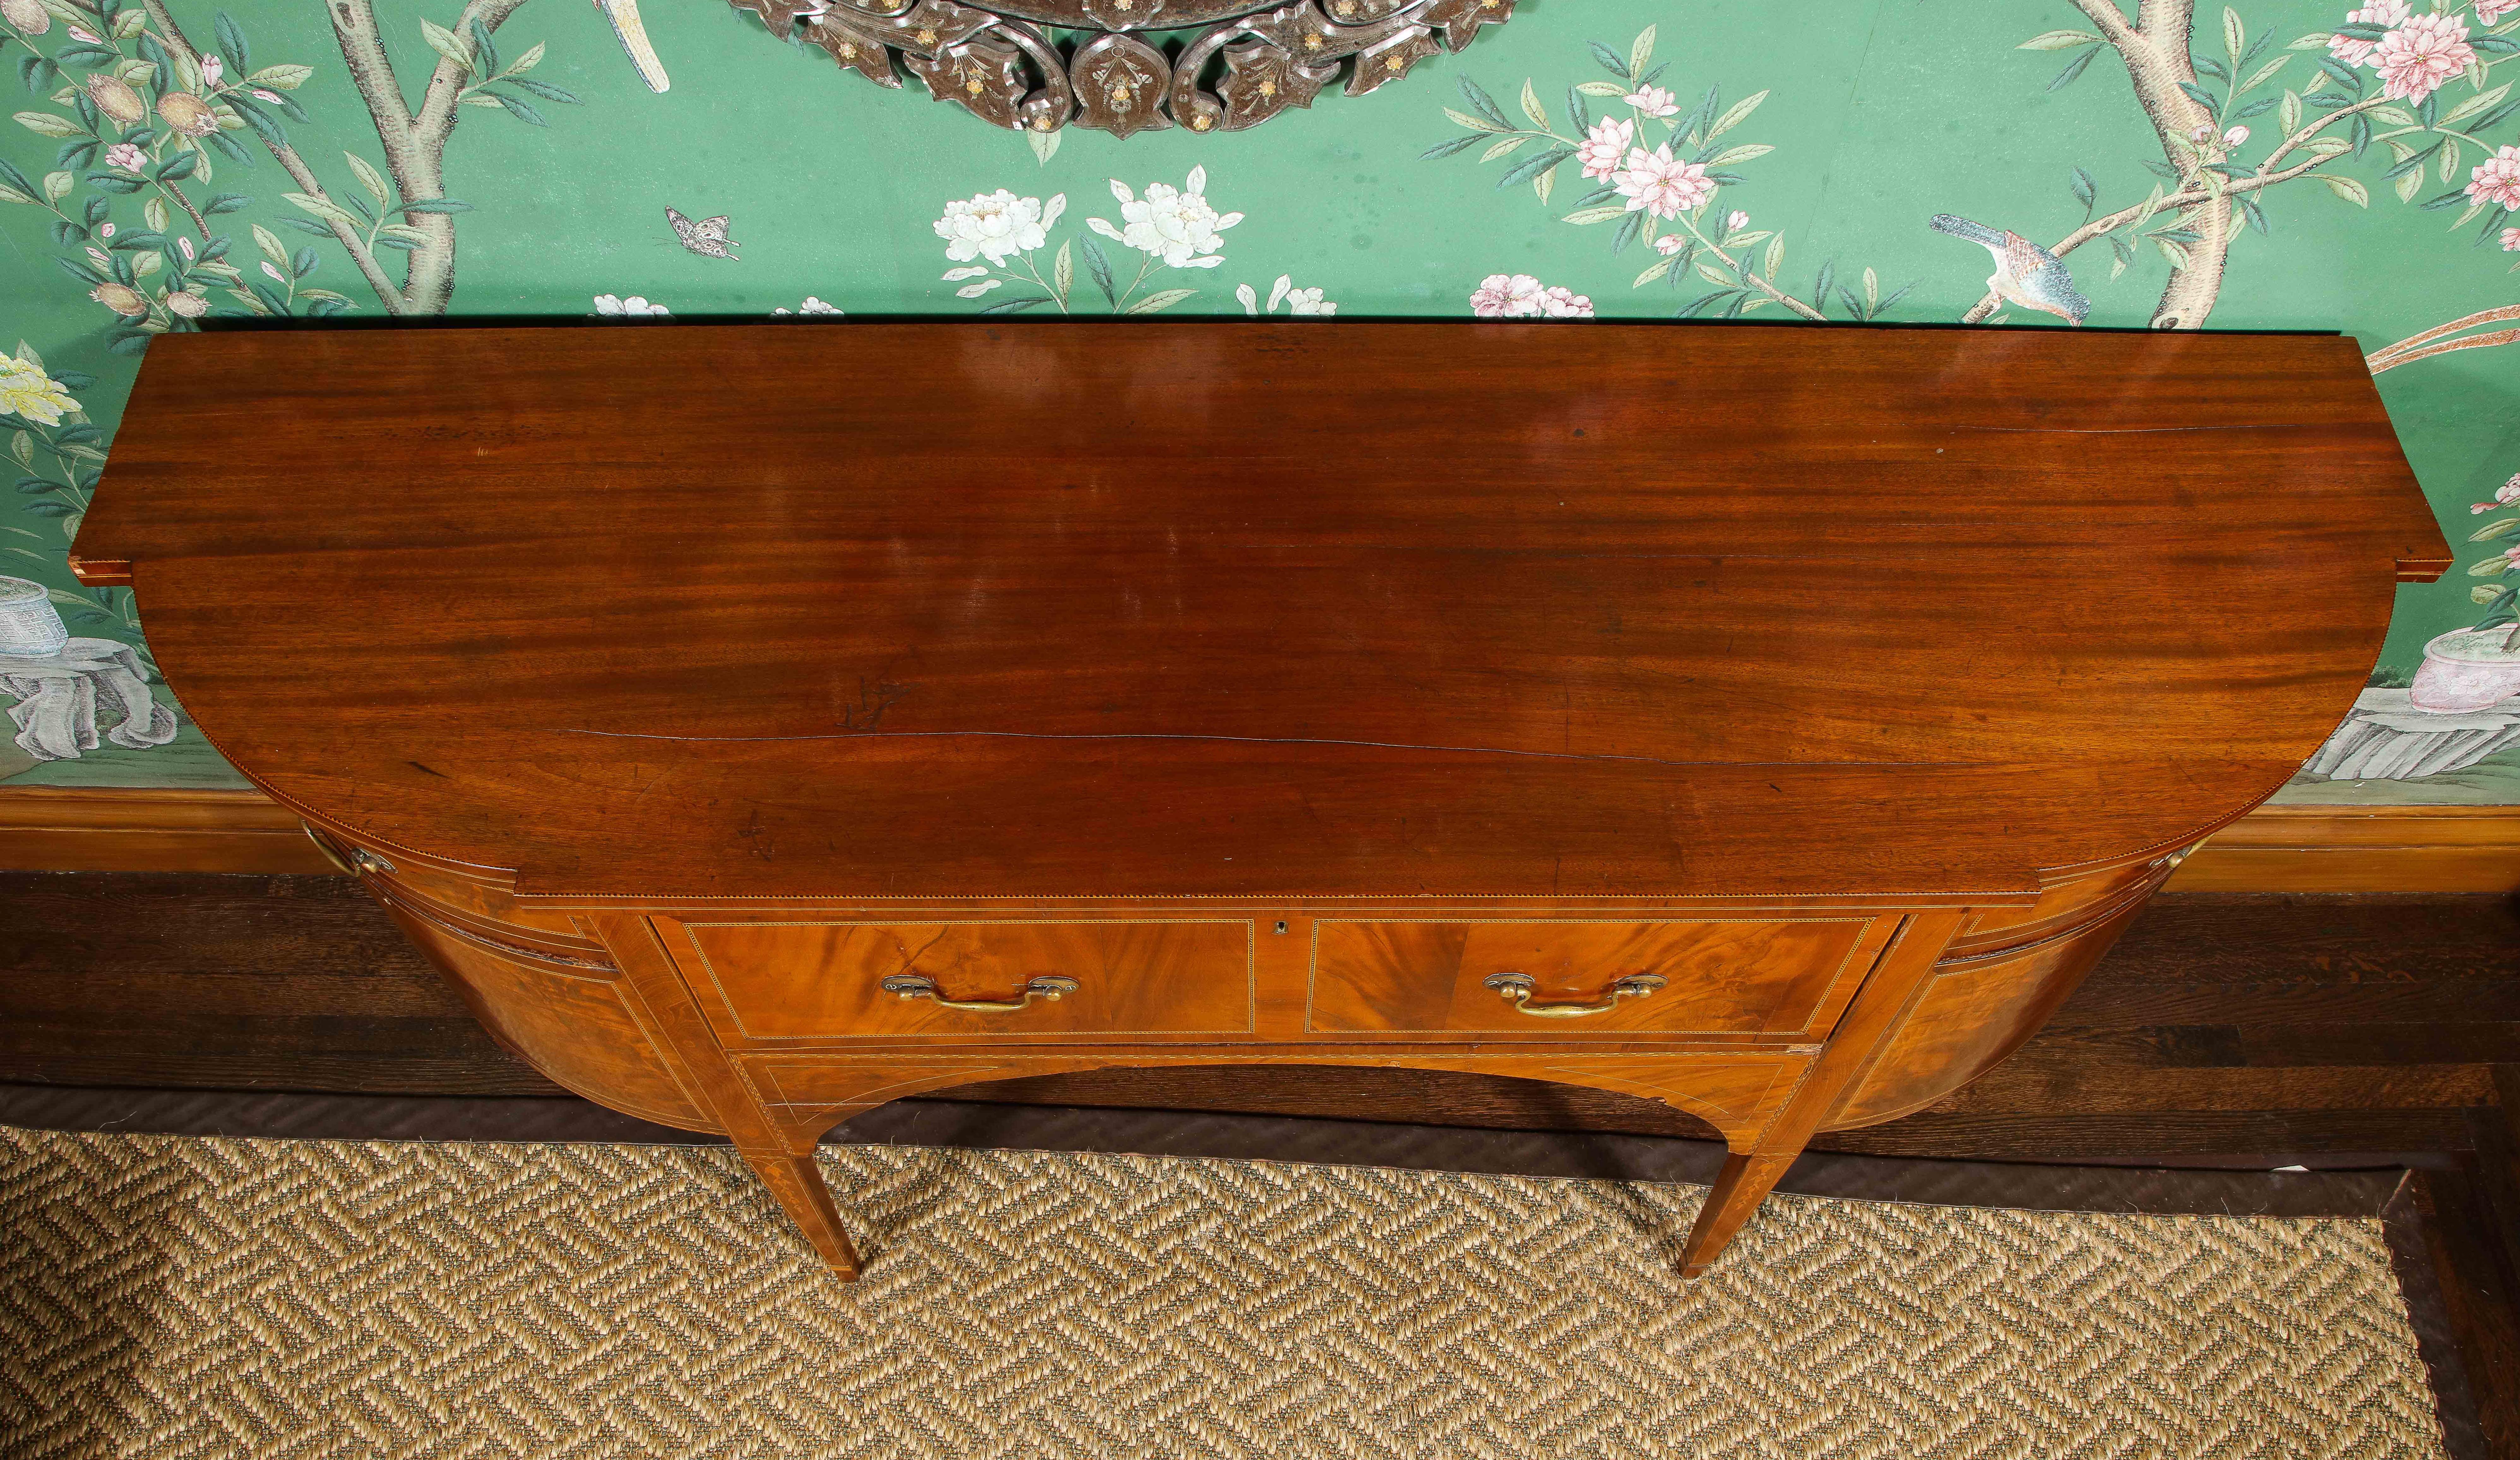 19th Century George III Style Parquetry Inlaid Bowfront Mahogany Buffet For Sale 17